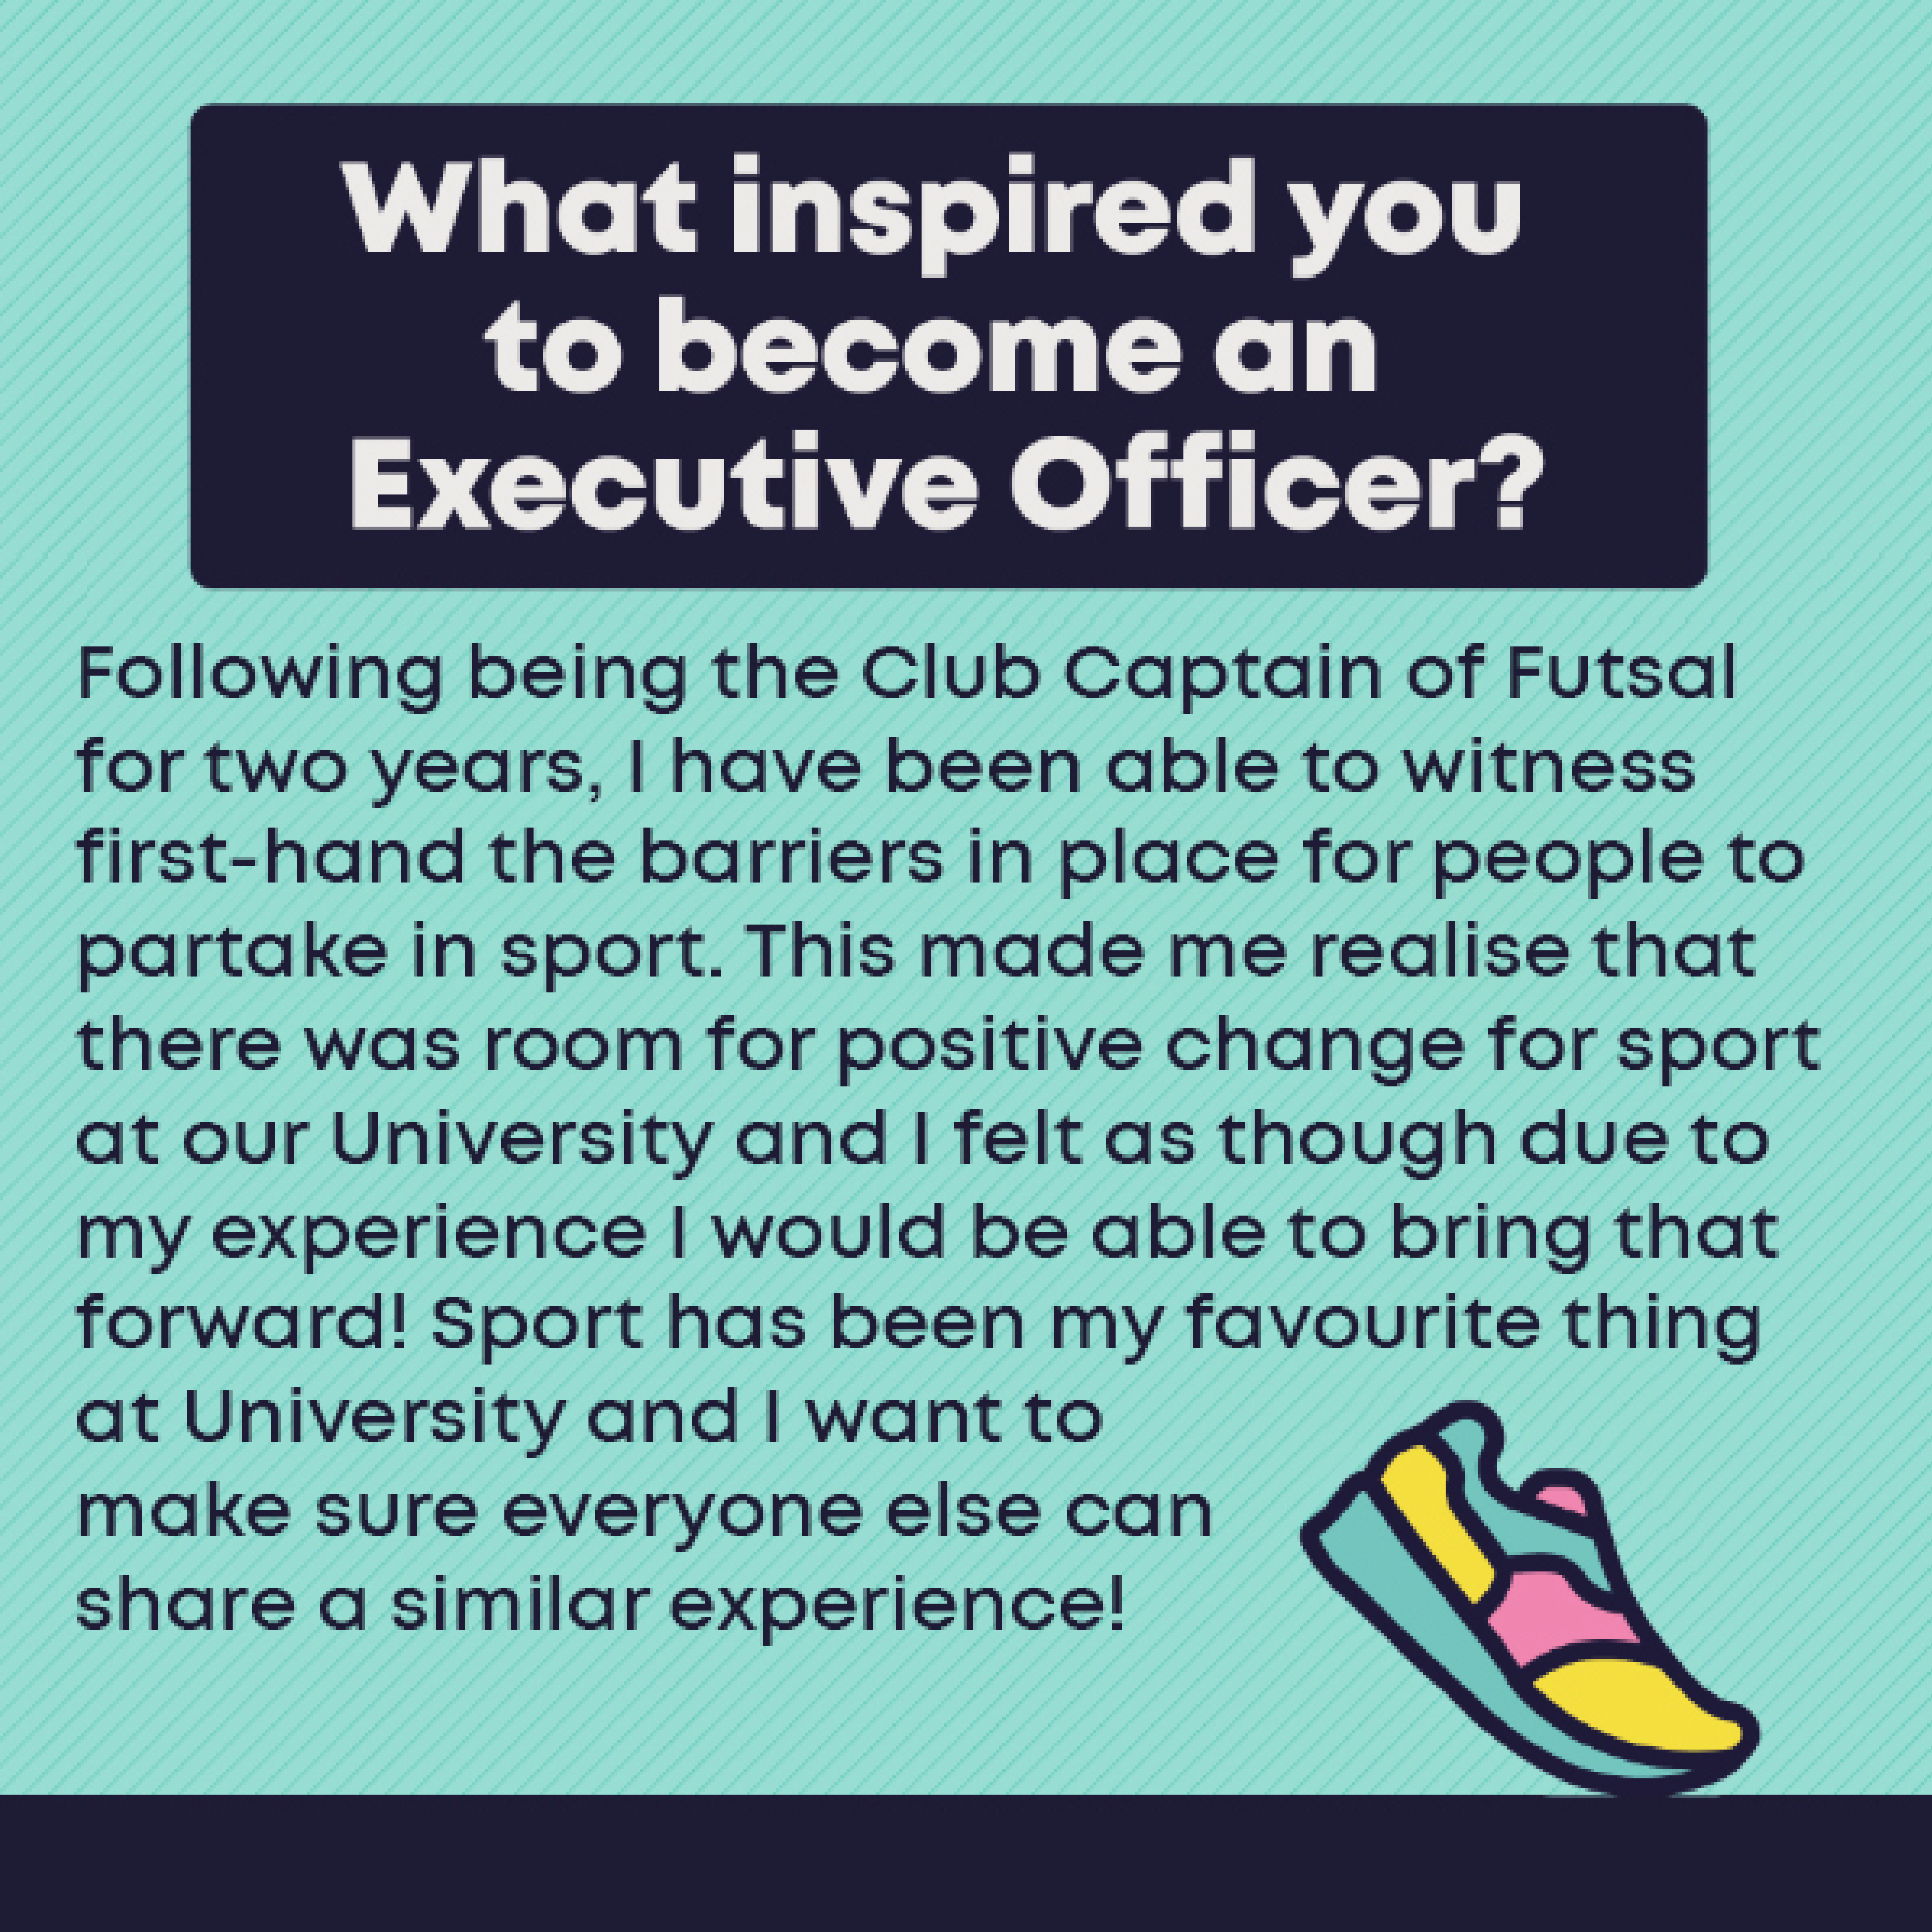 What inspired you to become an Exec Officer?: Following being the Club Captain of Futsal for two years, I have been able to witness first-hand the barriers in place for people to partake in sport. This made me realise that there was room for positive change for sport at our University and I felt as though due to my experience I would be able to bring that forward! Sport has been my favourite thing at University and I want to make sure everyone else can share a similar experience!